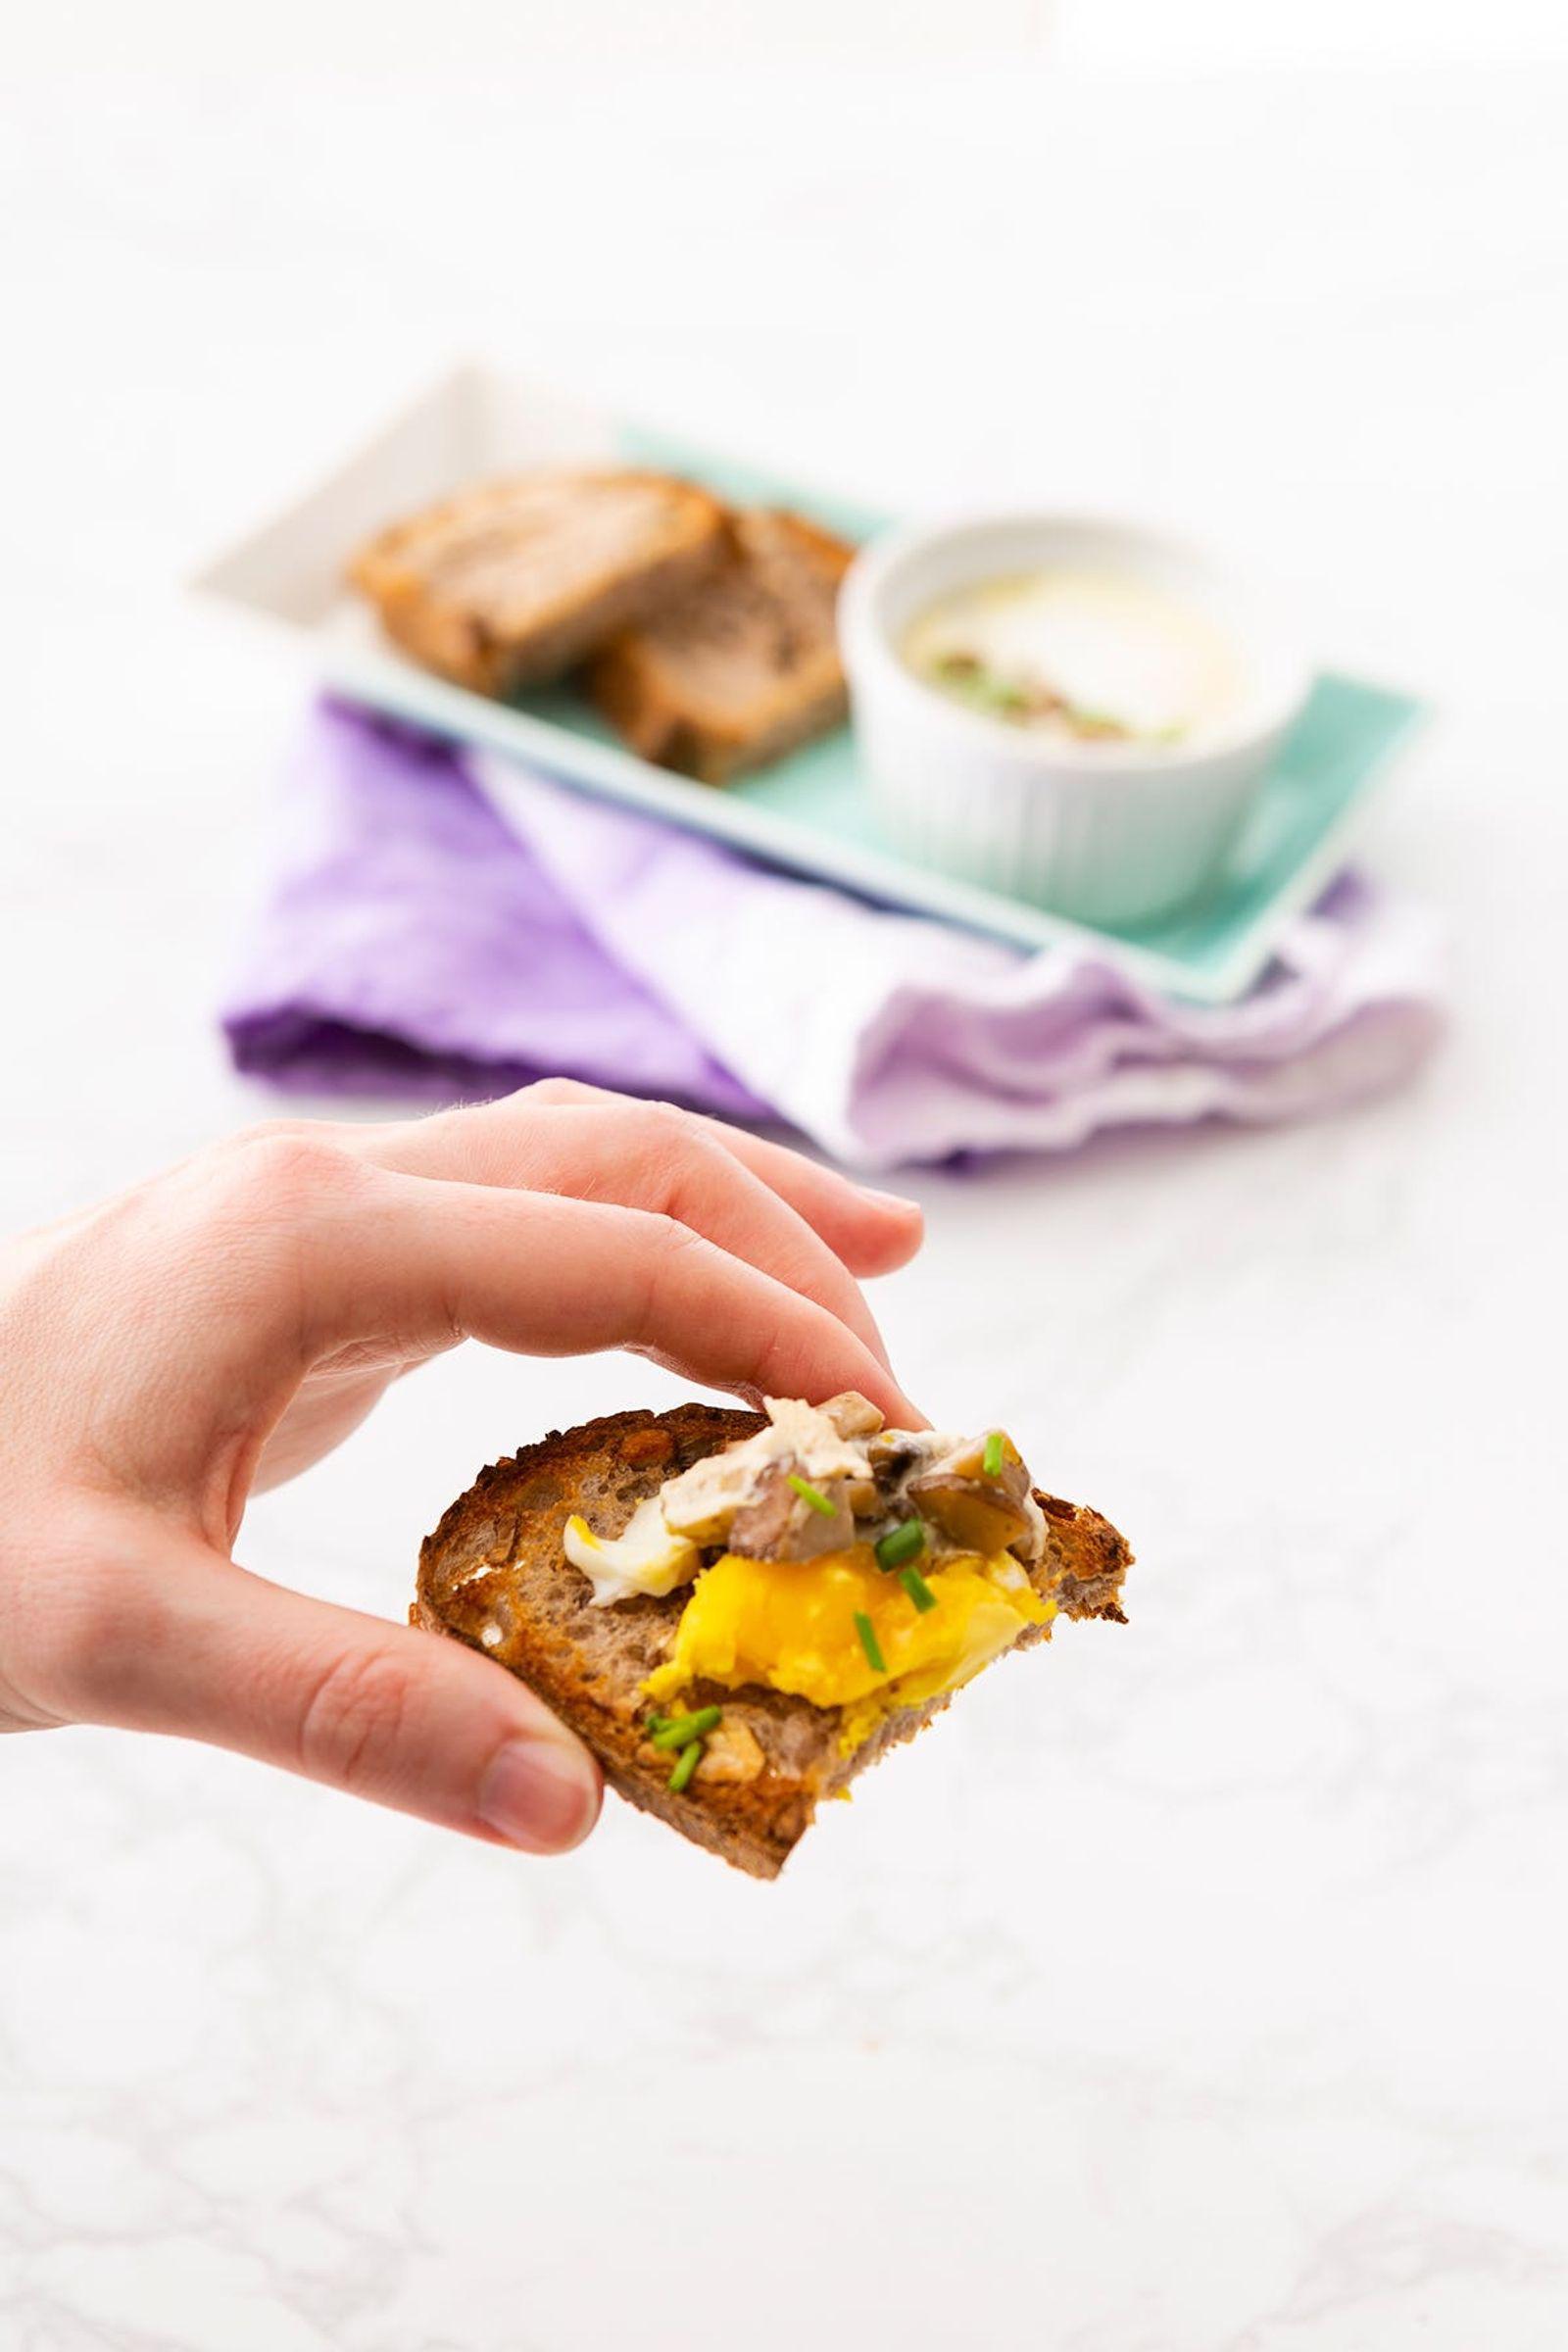 An Instant Pot will help cook your mix of eggs, mushrooms, and cream into something truly divine. Dig in with a spoon or spread on a slice of your favorite bread for a breakfast-for-lunch feast. (via <strong><a href="https://www.brit.co/5-minute-pressure-cooked-ramekin-eggs/">Brit + Co.</a></strong>)